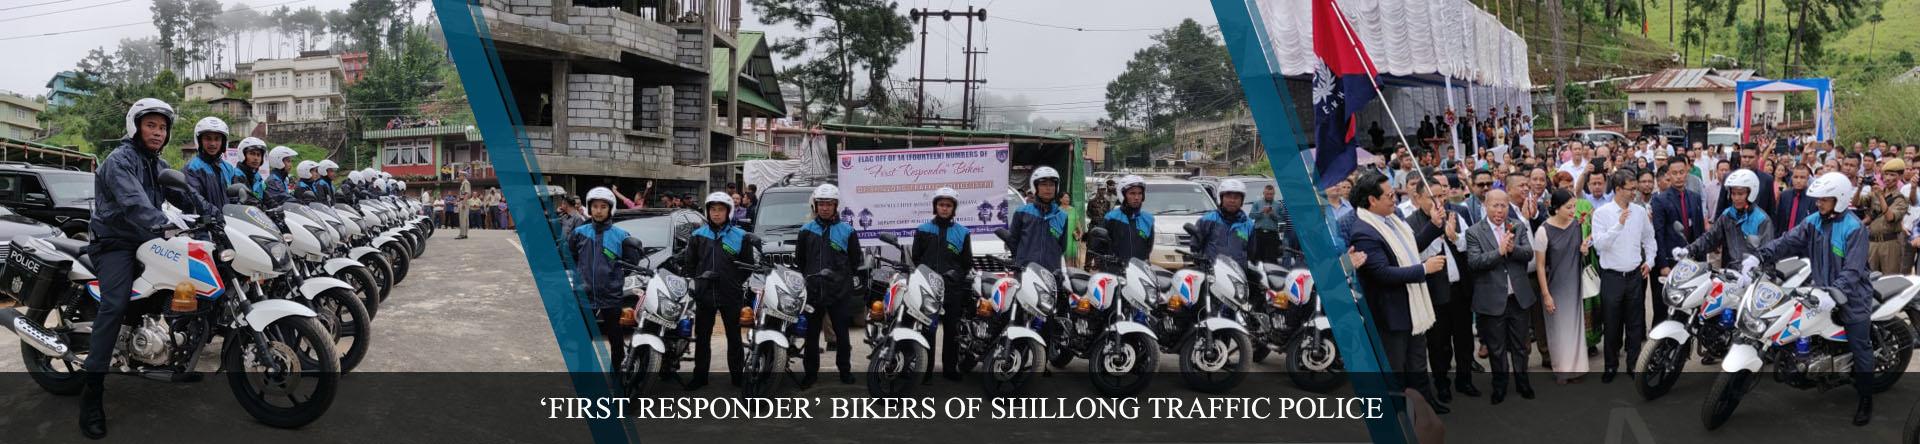 First Responder Bikers of Shillong Traffic